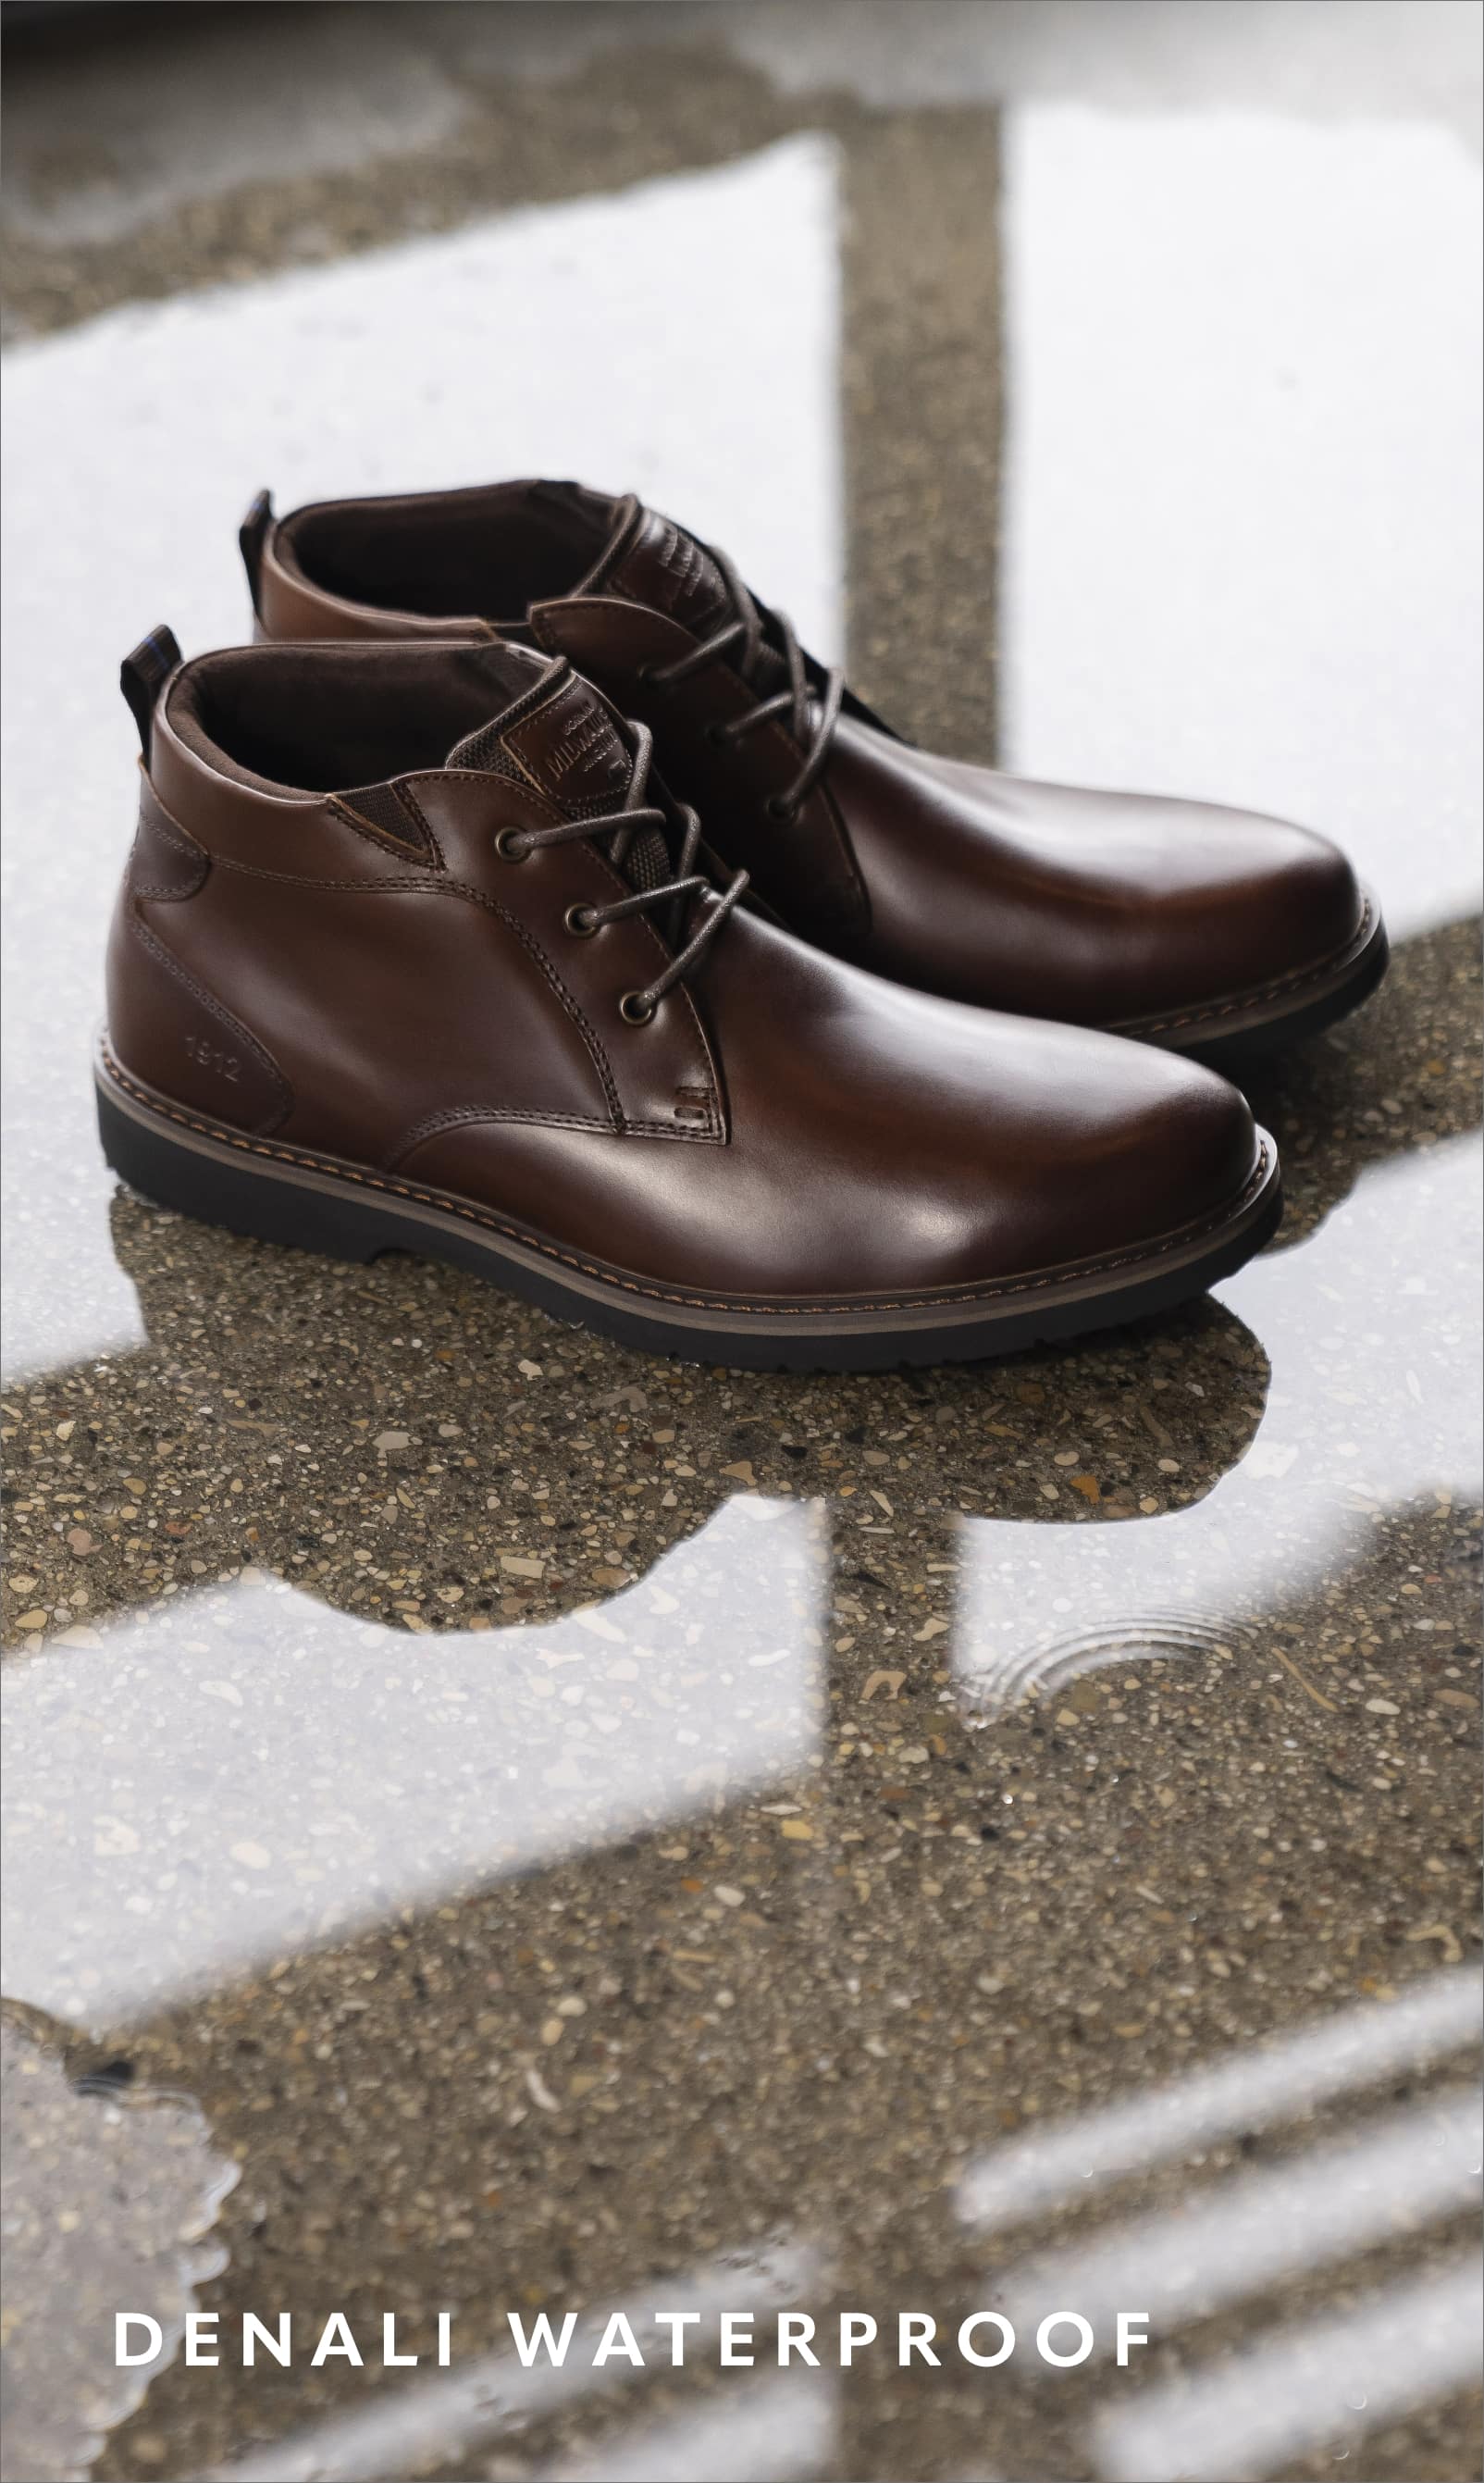 Men's Boots category. Image features the Denali Waterproof boot in brown.